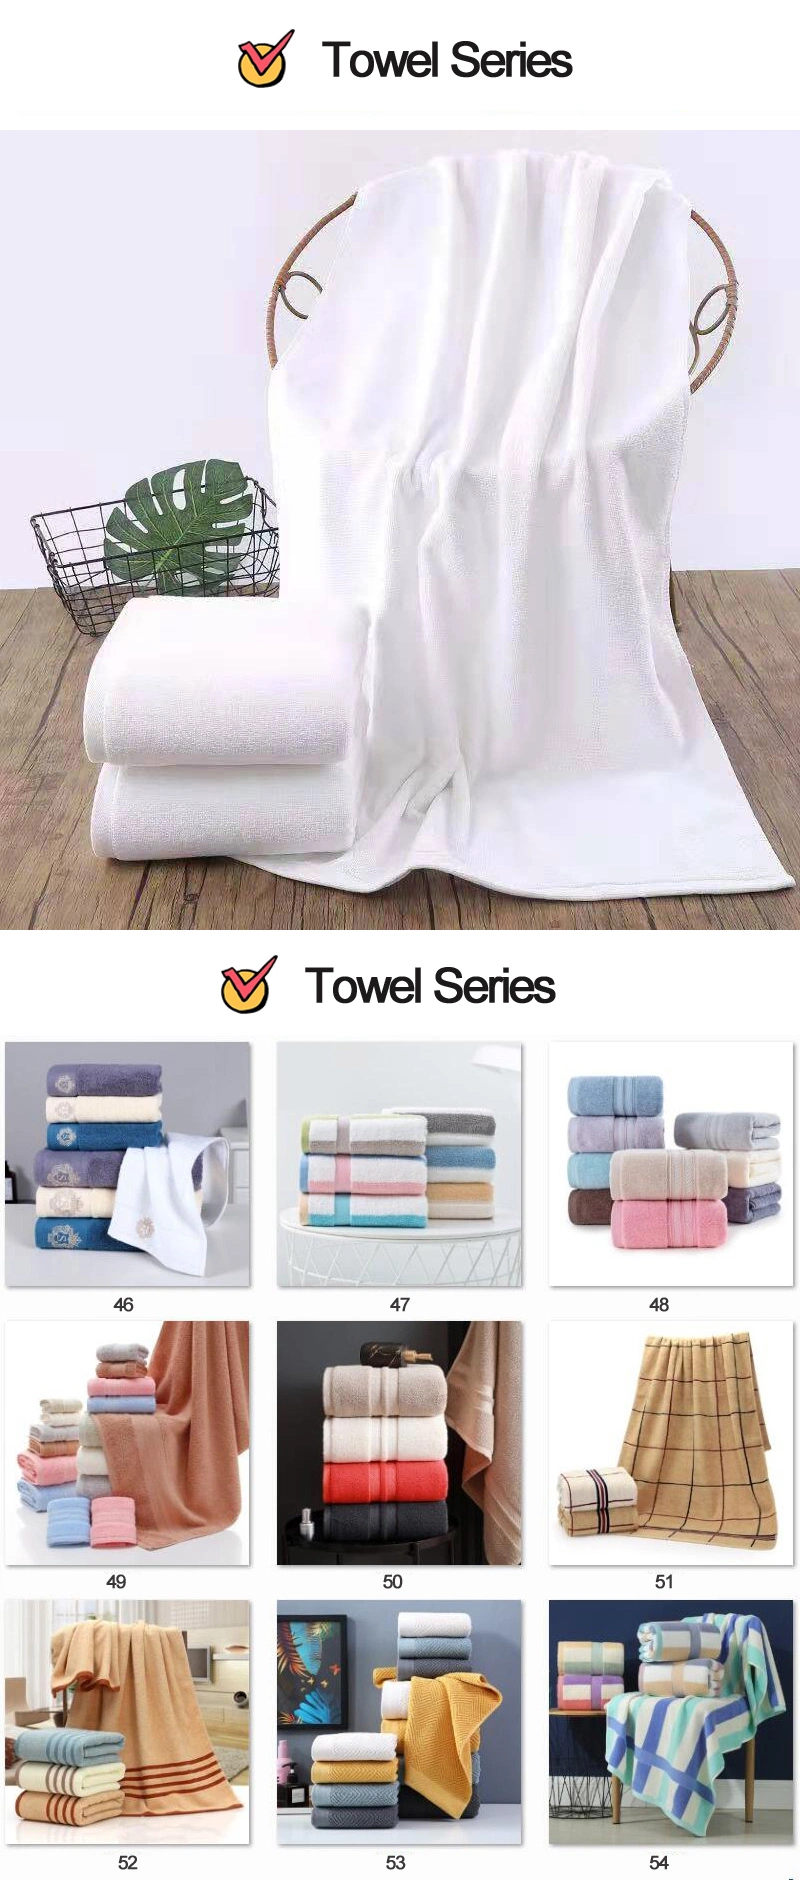 Set of 4 Luxury XL Oversized Bath Towels Extra Large Hotel Quality Towels 650 GSM Soft Combed Cotton Towels